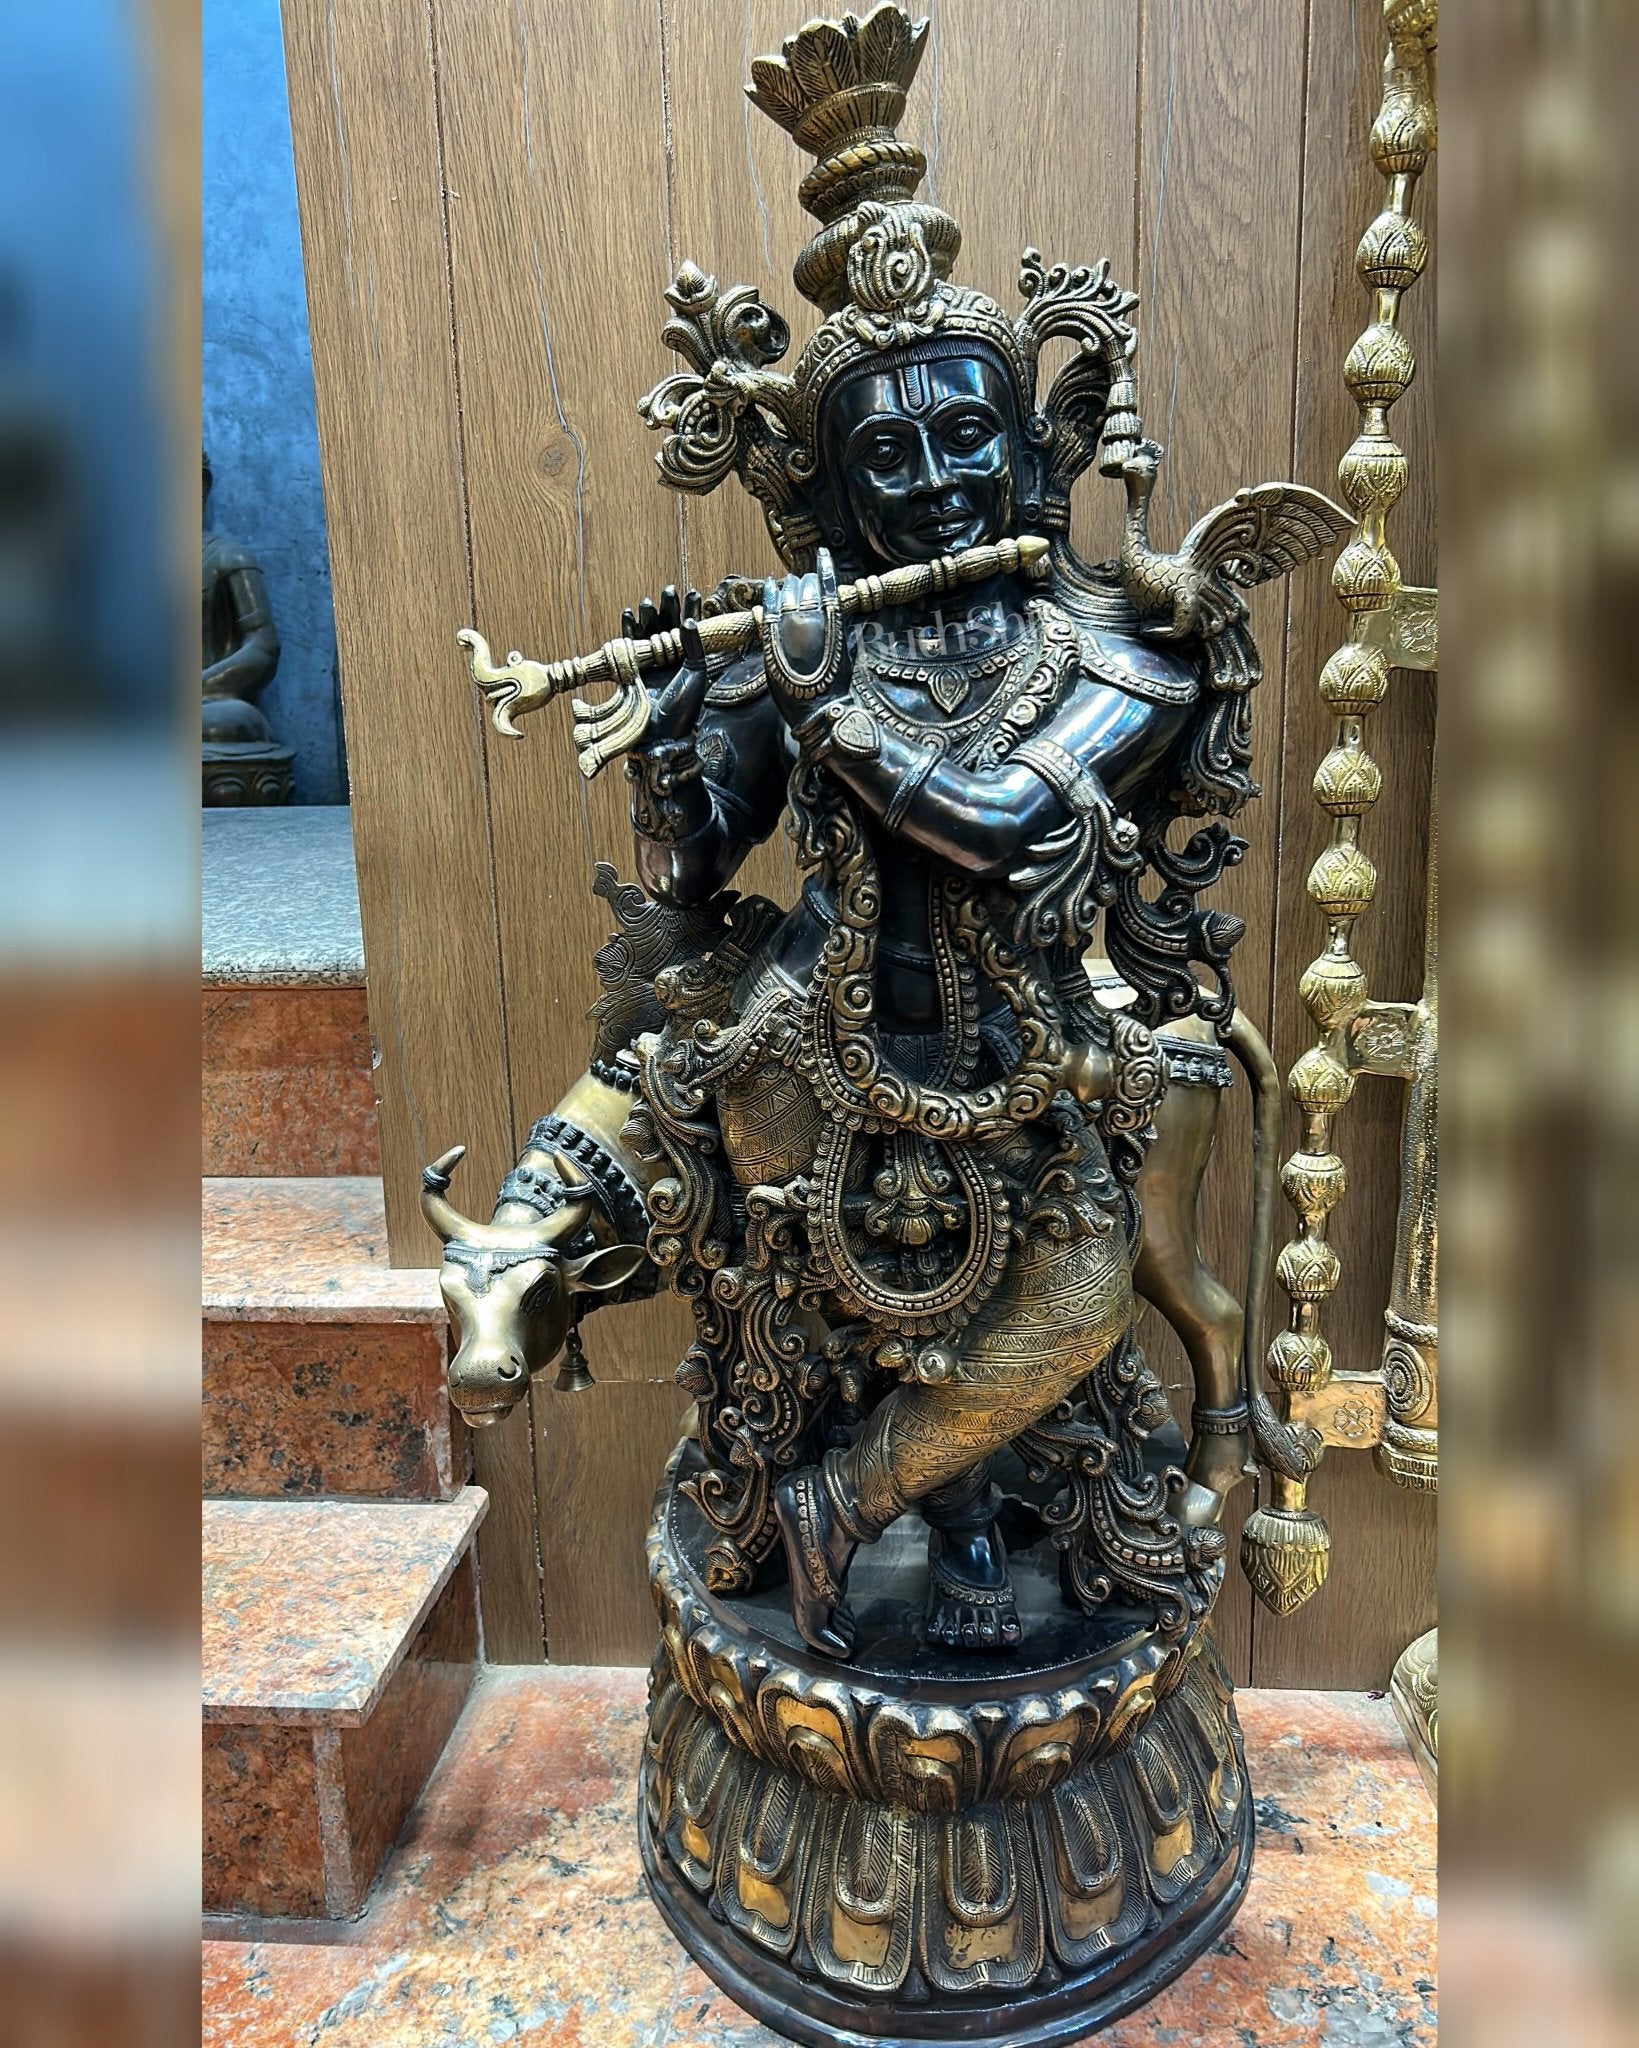 Brass Lord Krishna with Cow Statue | Large Size | 46"/ 4 feet - Budhshiv.com